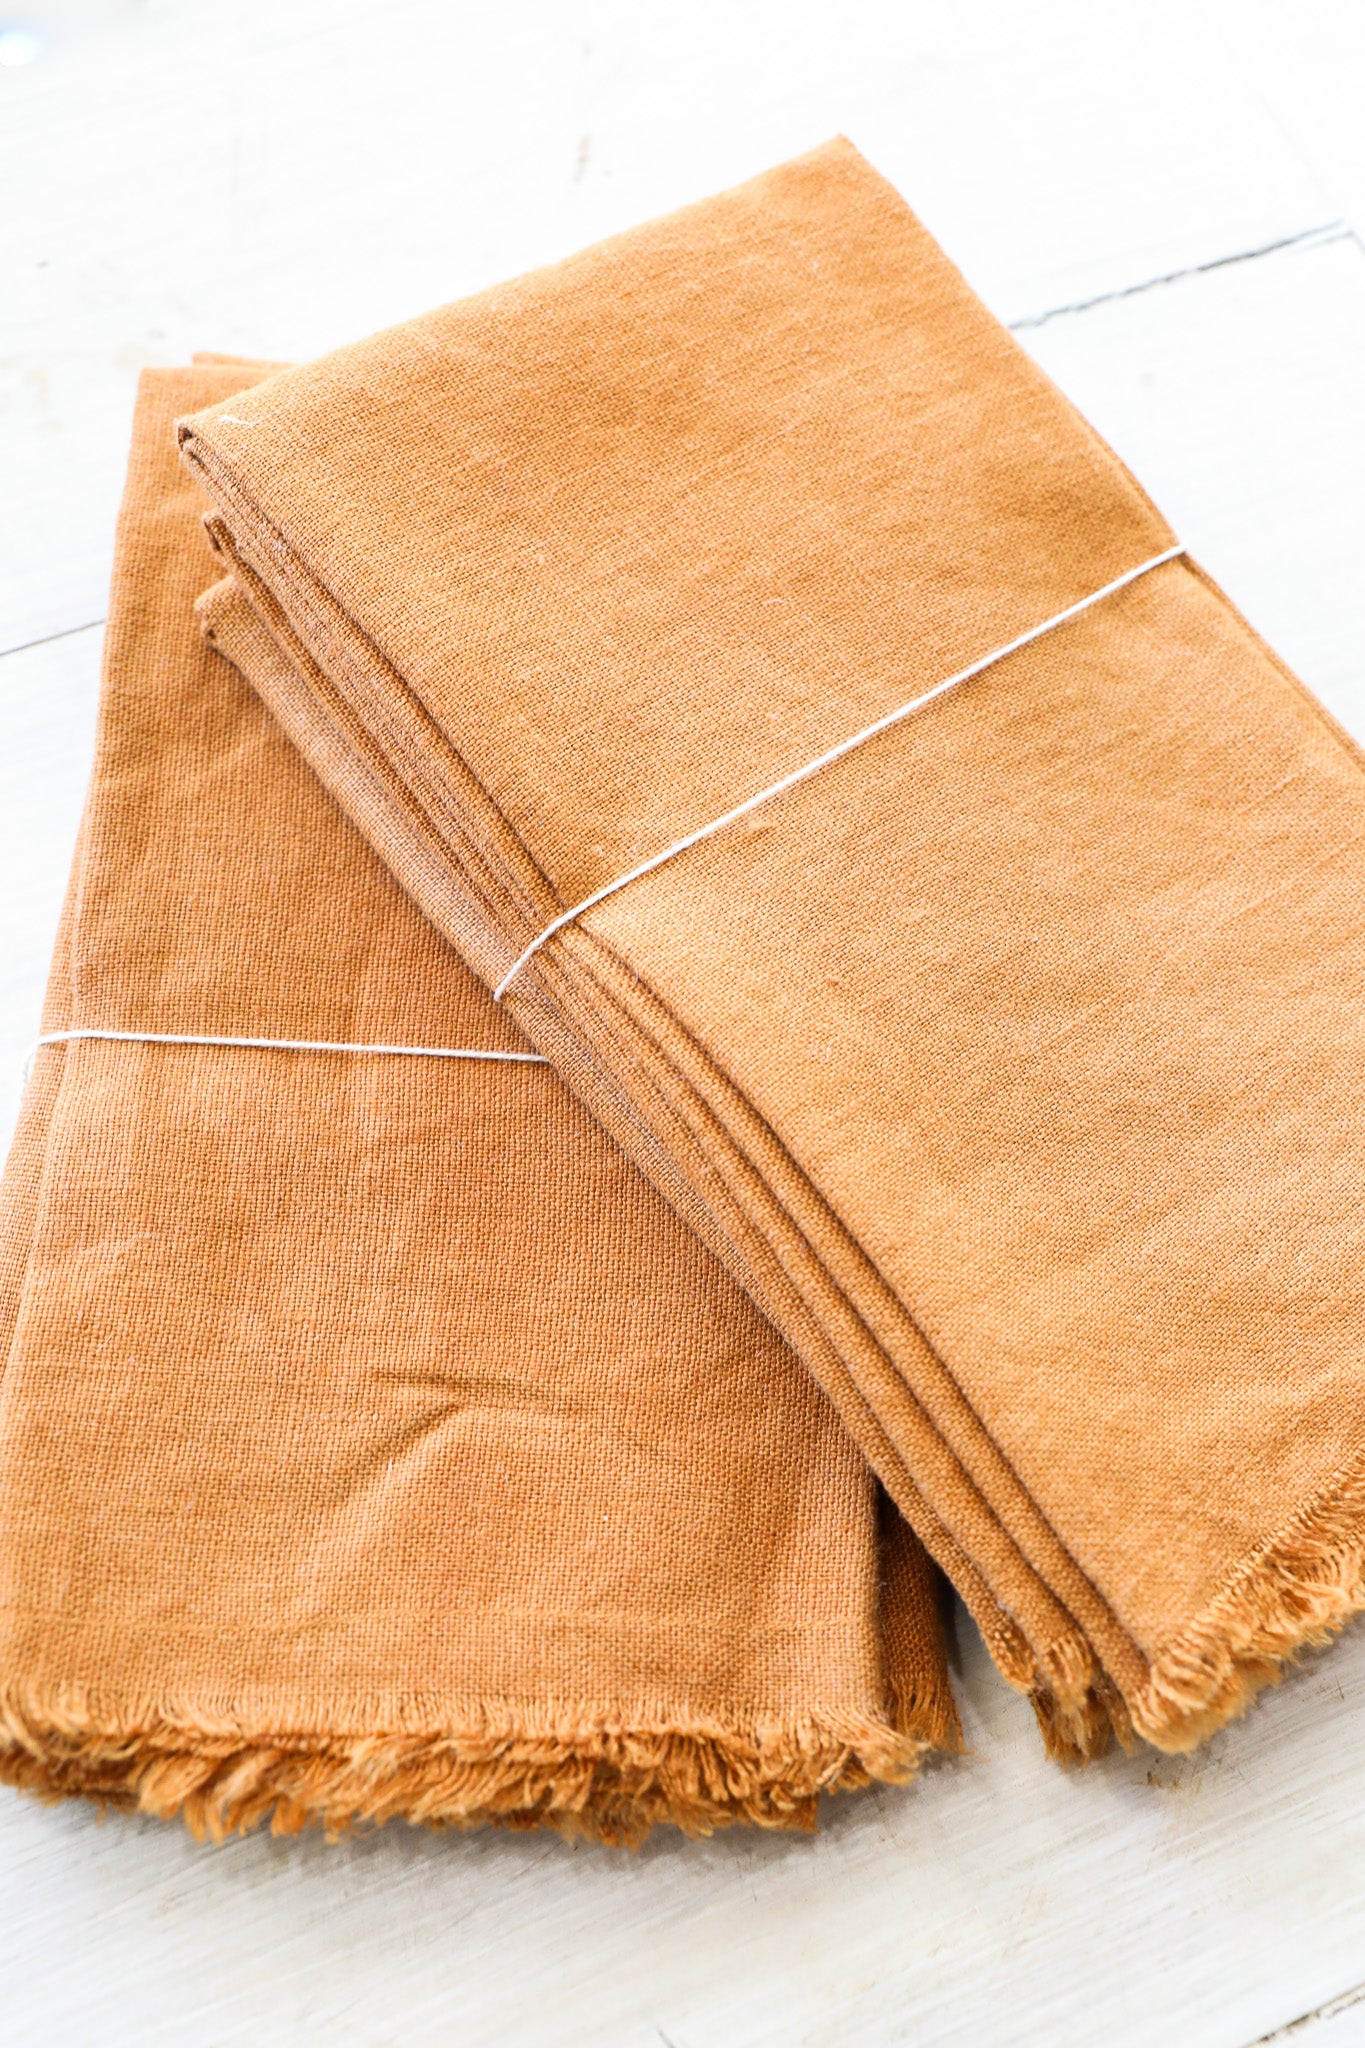 Naturally Dyed Linen Napkins (s/4)